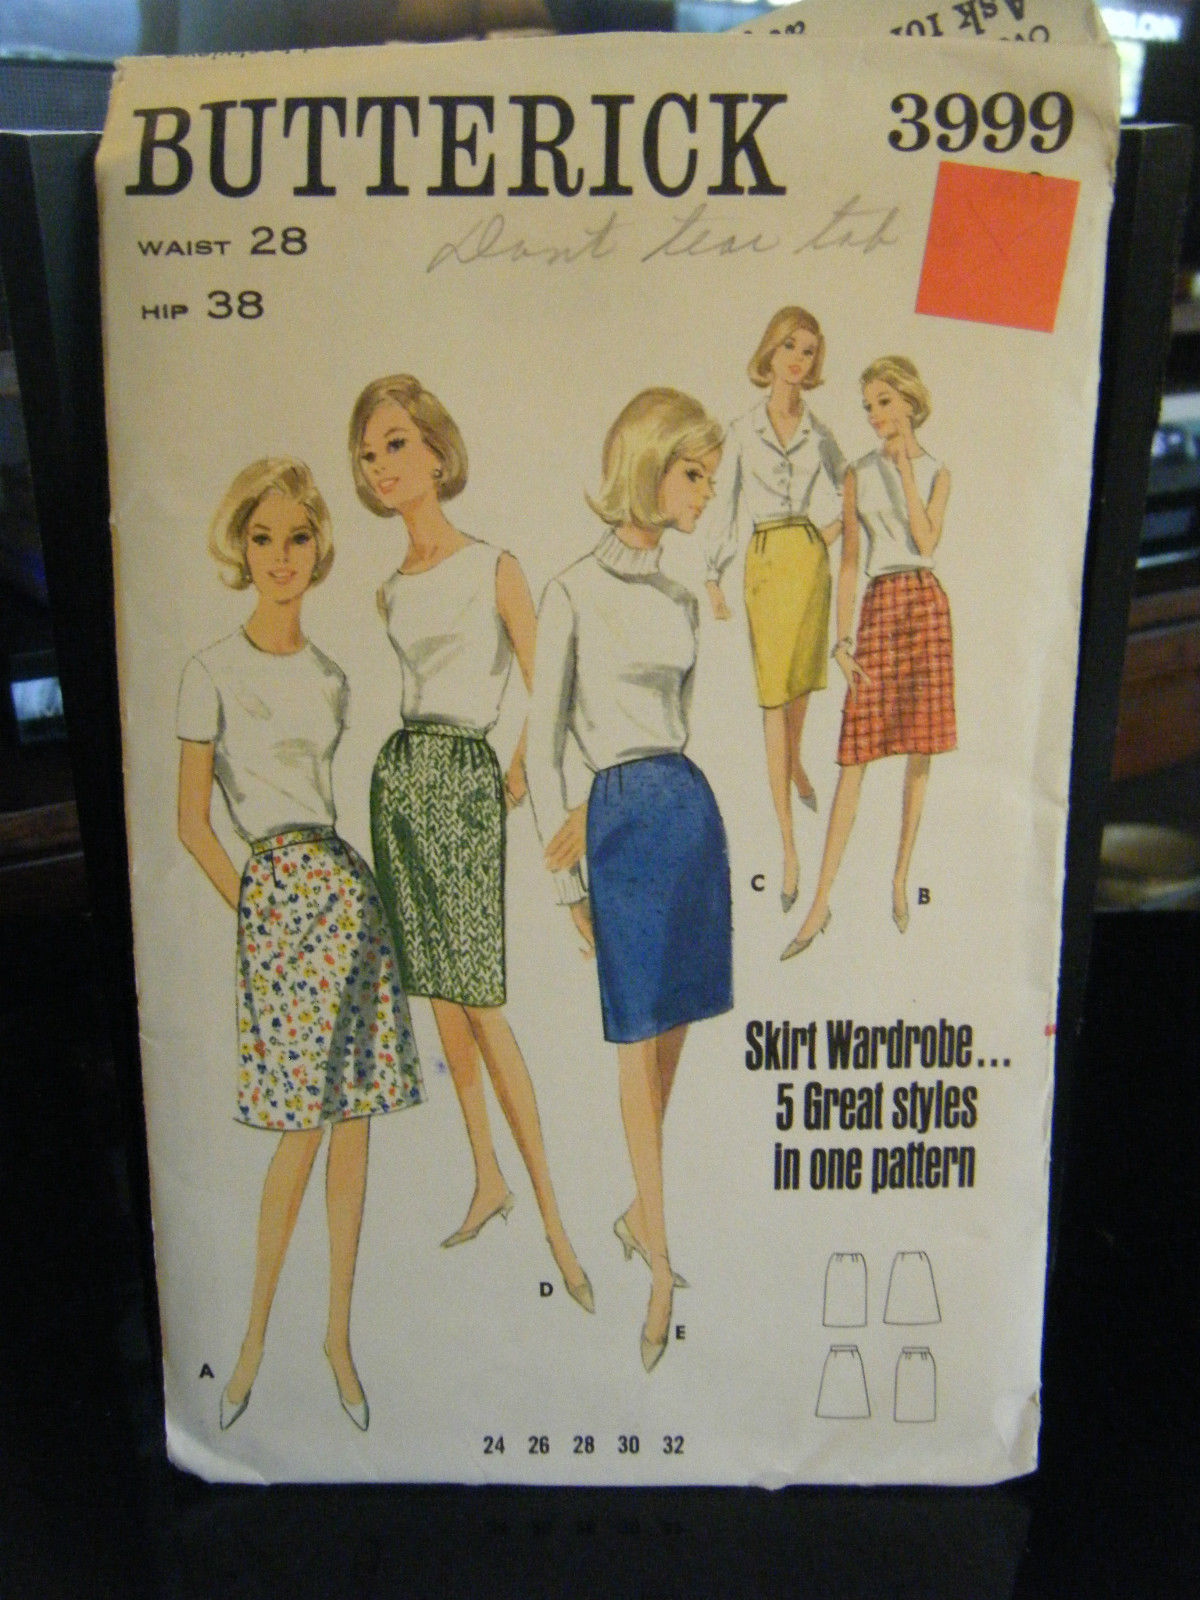 Primary image for Vintage Butterick 3999 Misses Skirt in 5 Versions Pattern - Waist 28 Hip 38